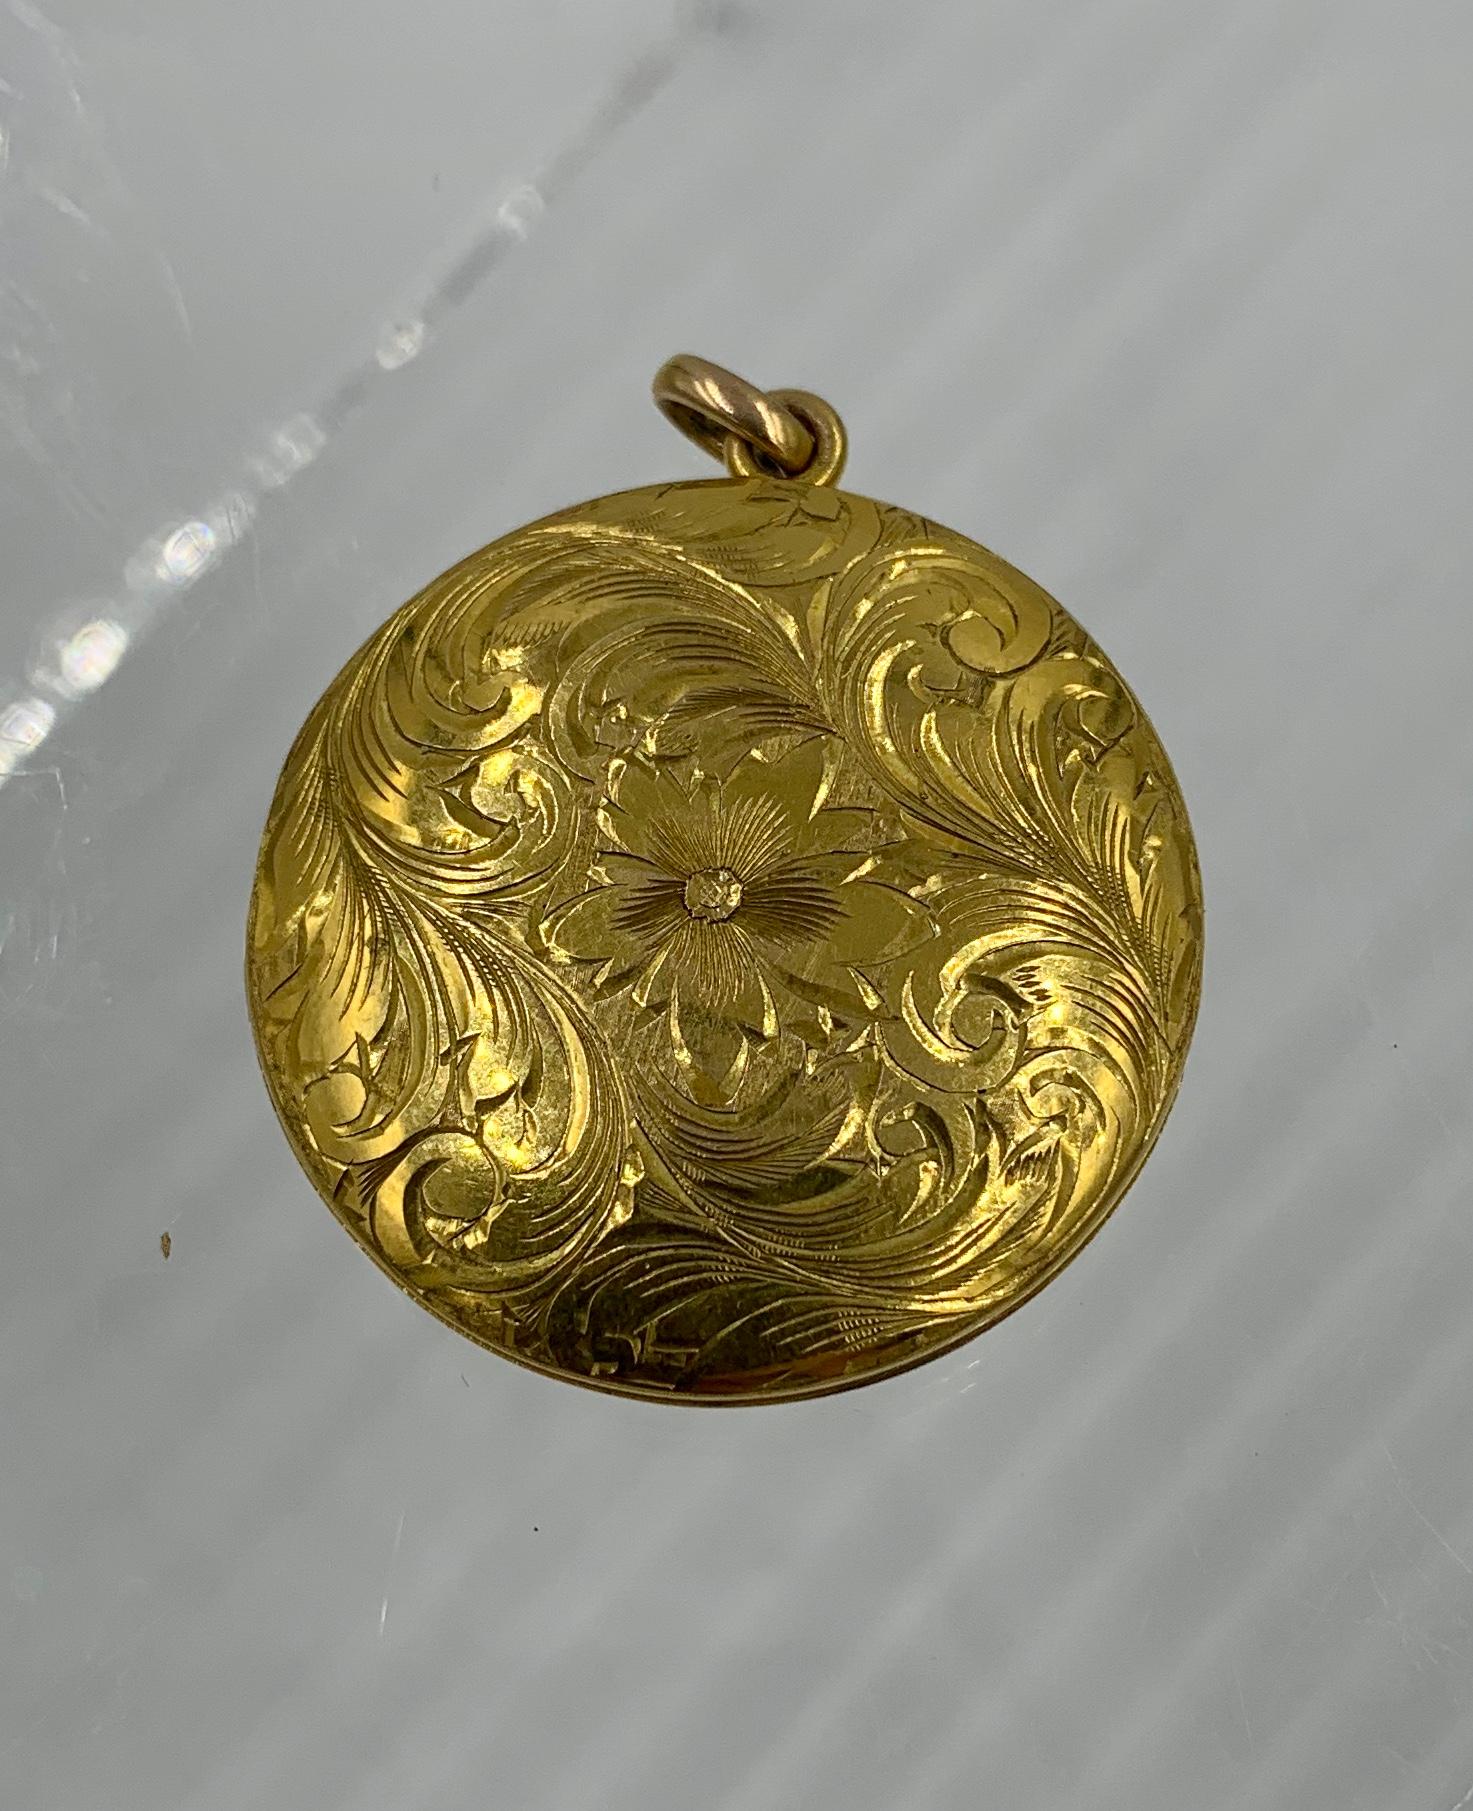 A GORGEOUS VICTORIAN BELLE EPOQUE PICTURE LOCKET PENDANT IN WARM 10 KARAT GOLD WITH BEAUTIFUL FLOWER AND ACANTHUS LEAF MOTIF ENGRAVING ON THE FRONT AND AN ENGRAVED MONOGRAM ON THE REVERSE.   THE LOCKET IS A PERFECT SIZE - 1 1/4 INCHES IN